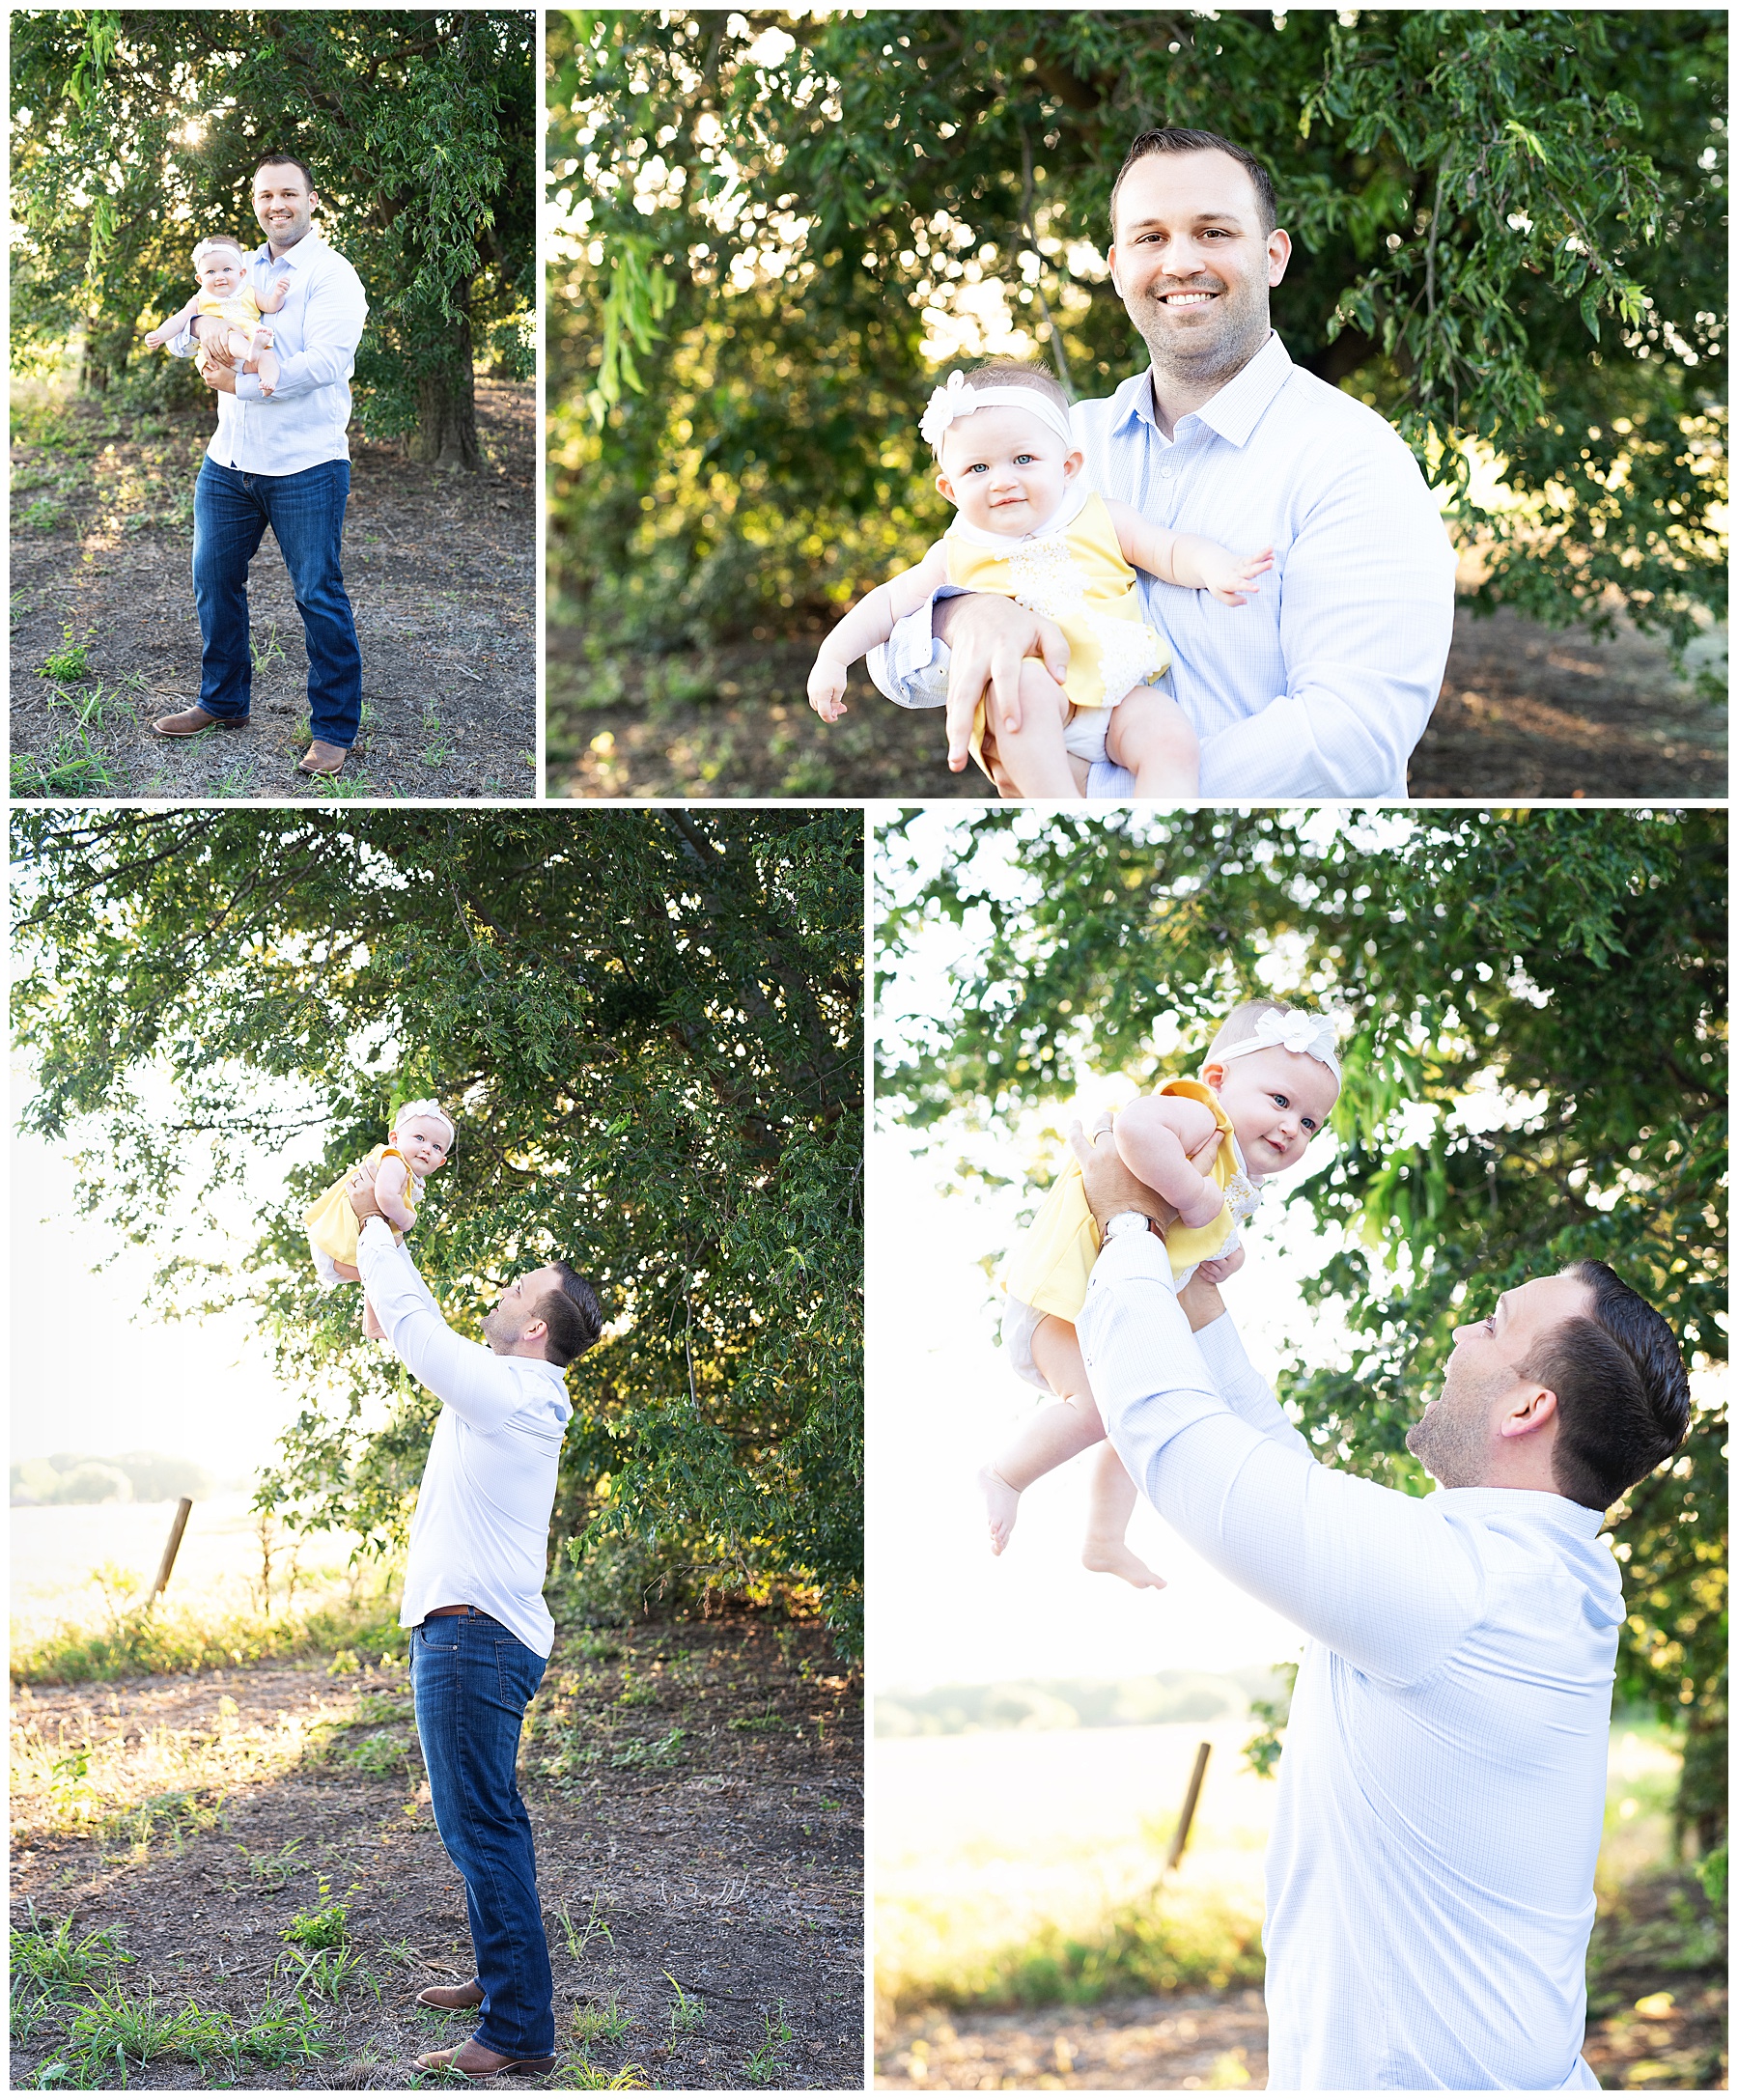 dad throwing his baby girl in the air playing